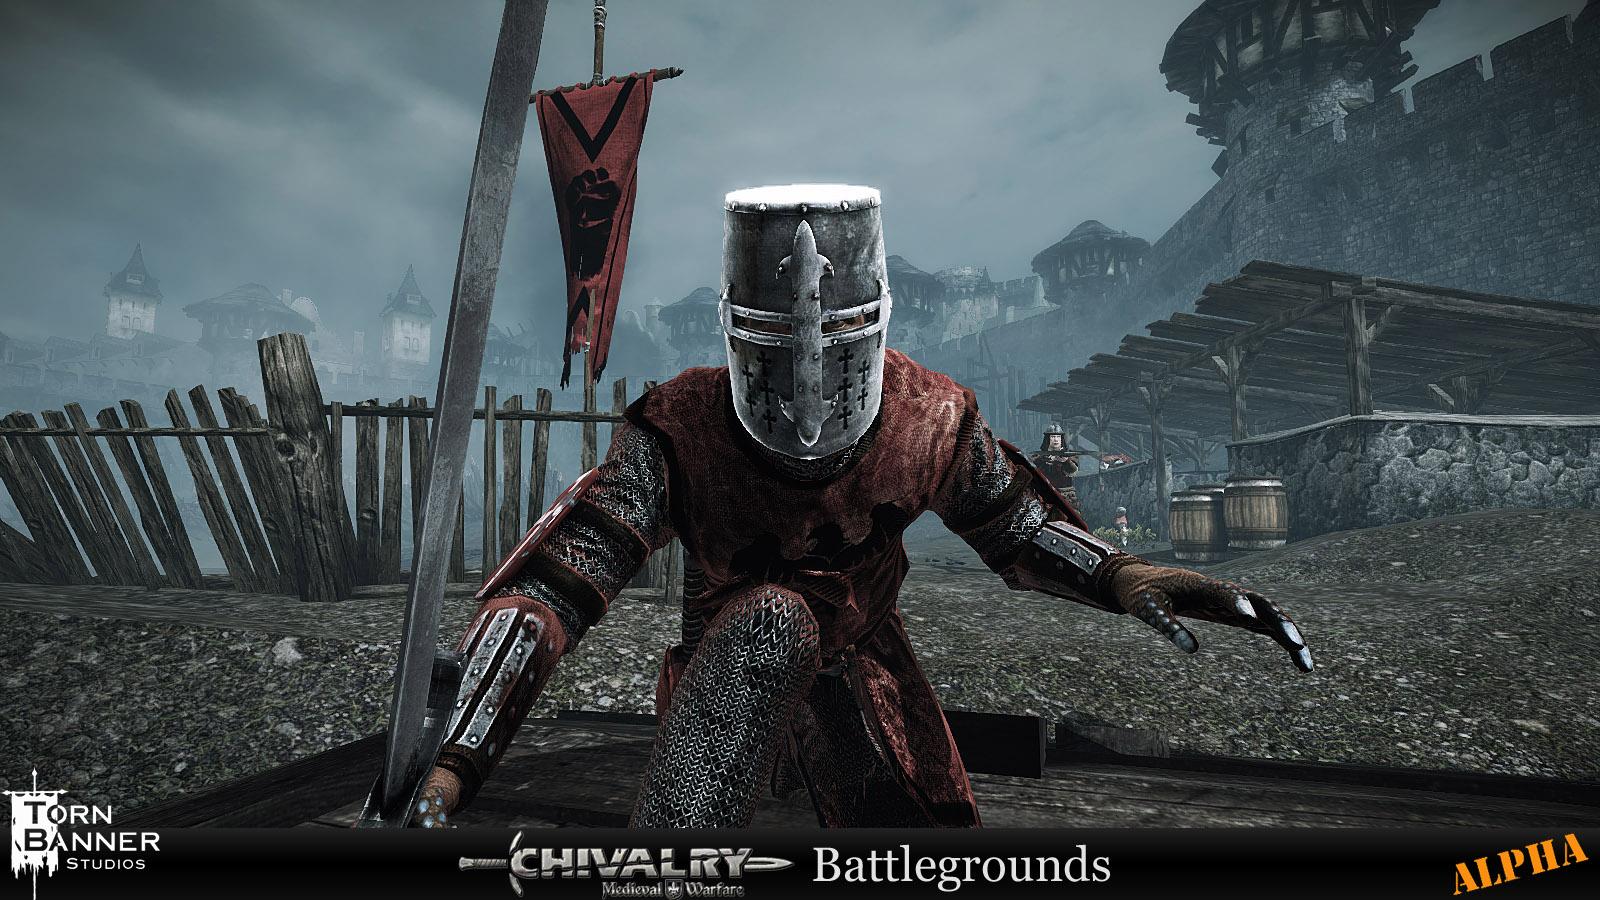 Battlegrounds, Weapons and Combat image: Medieval Warfare